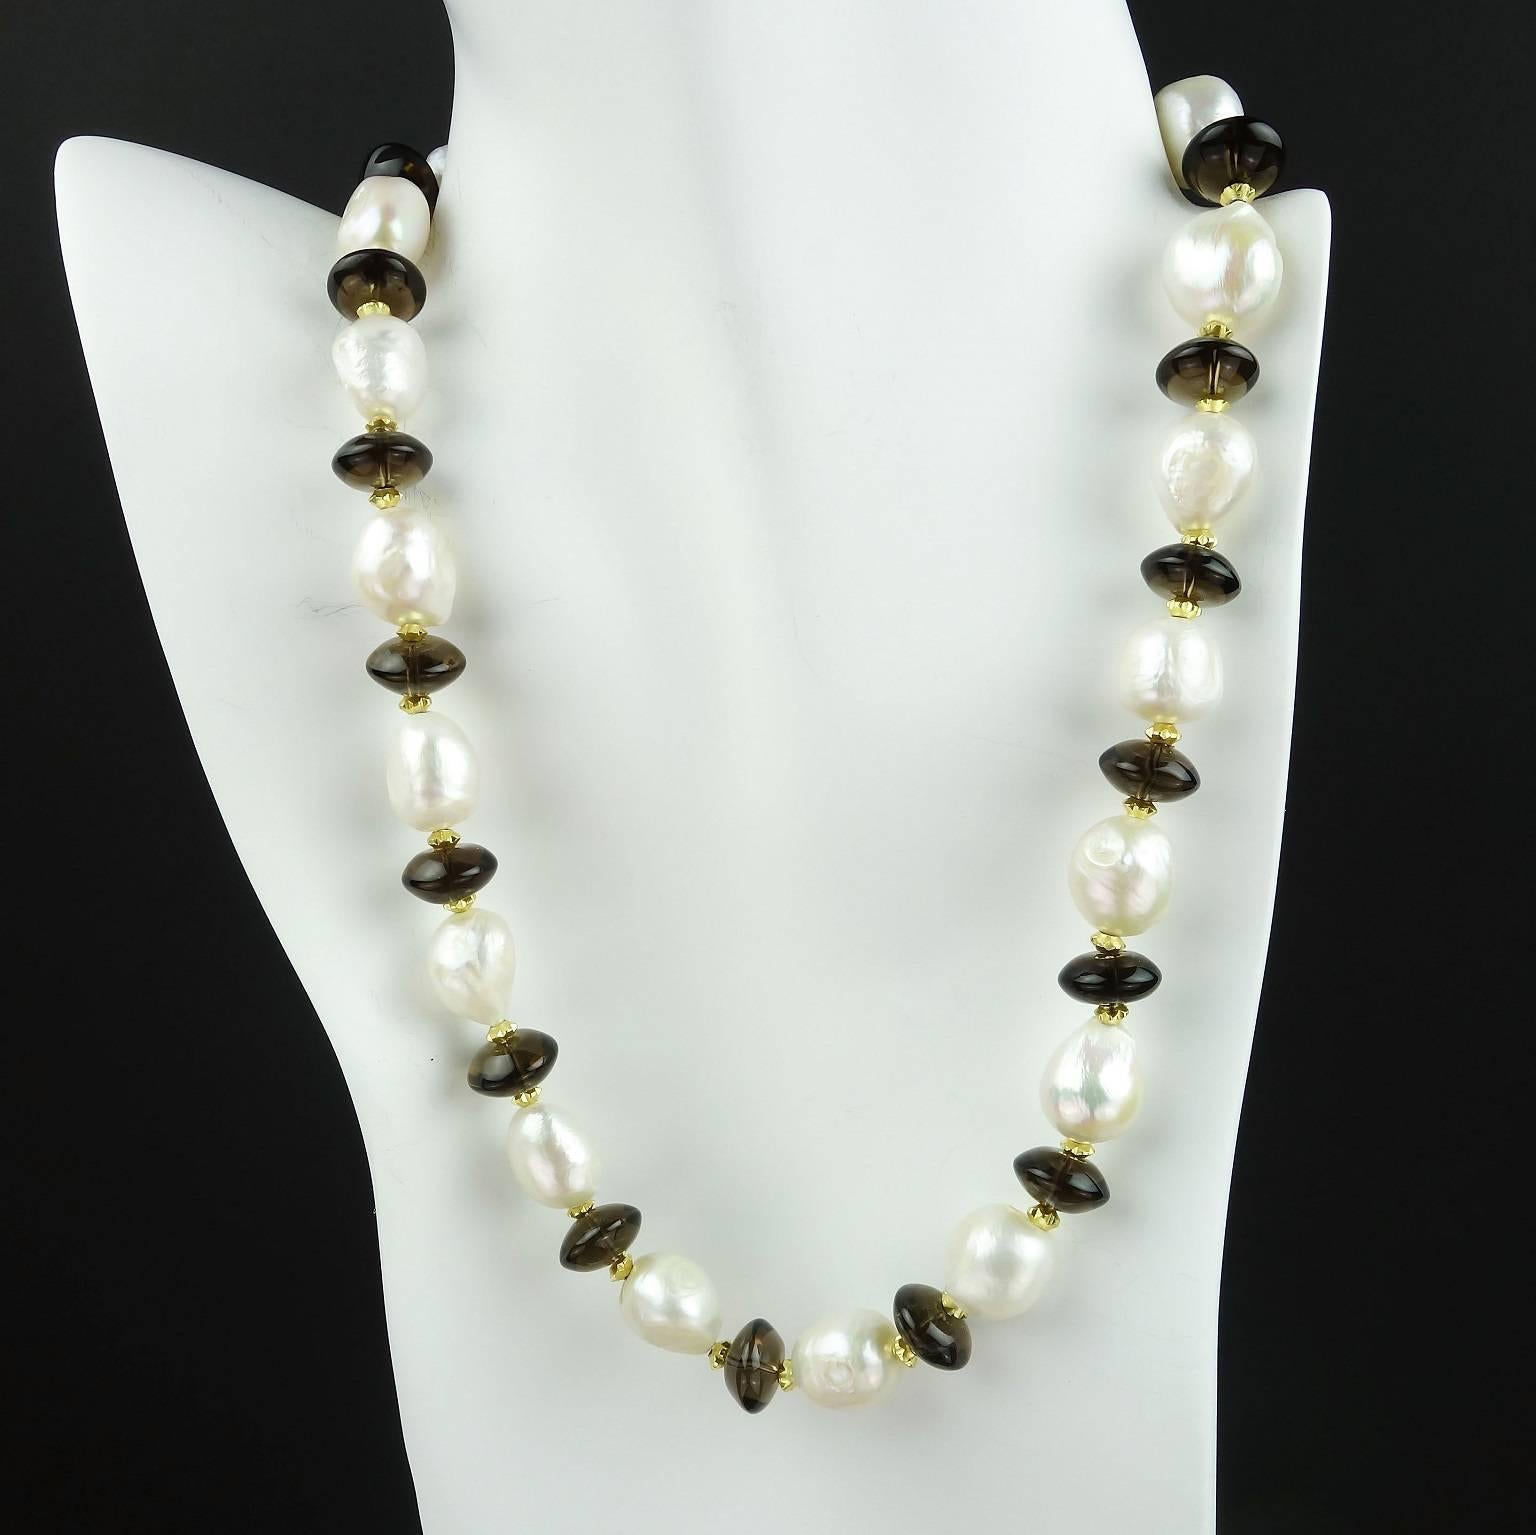 Artisan Gemjunky Classic Necklace of White Pearls and Smoky Quartz Rondelles